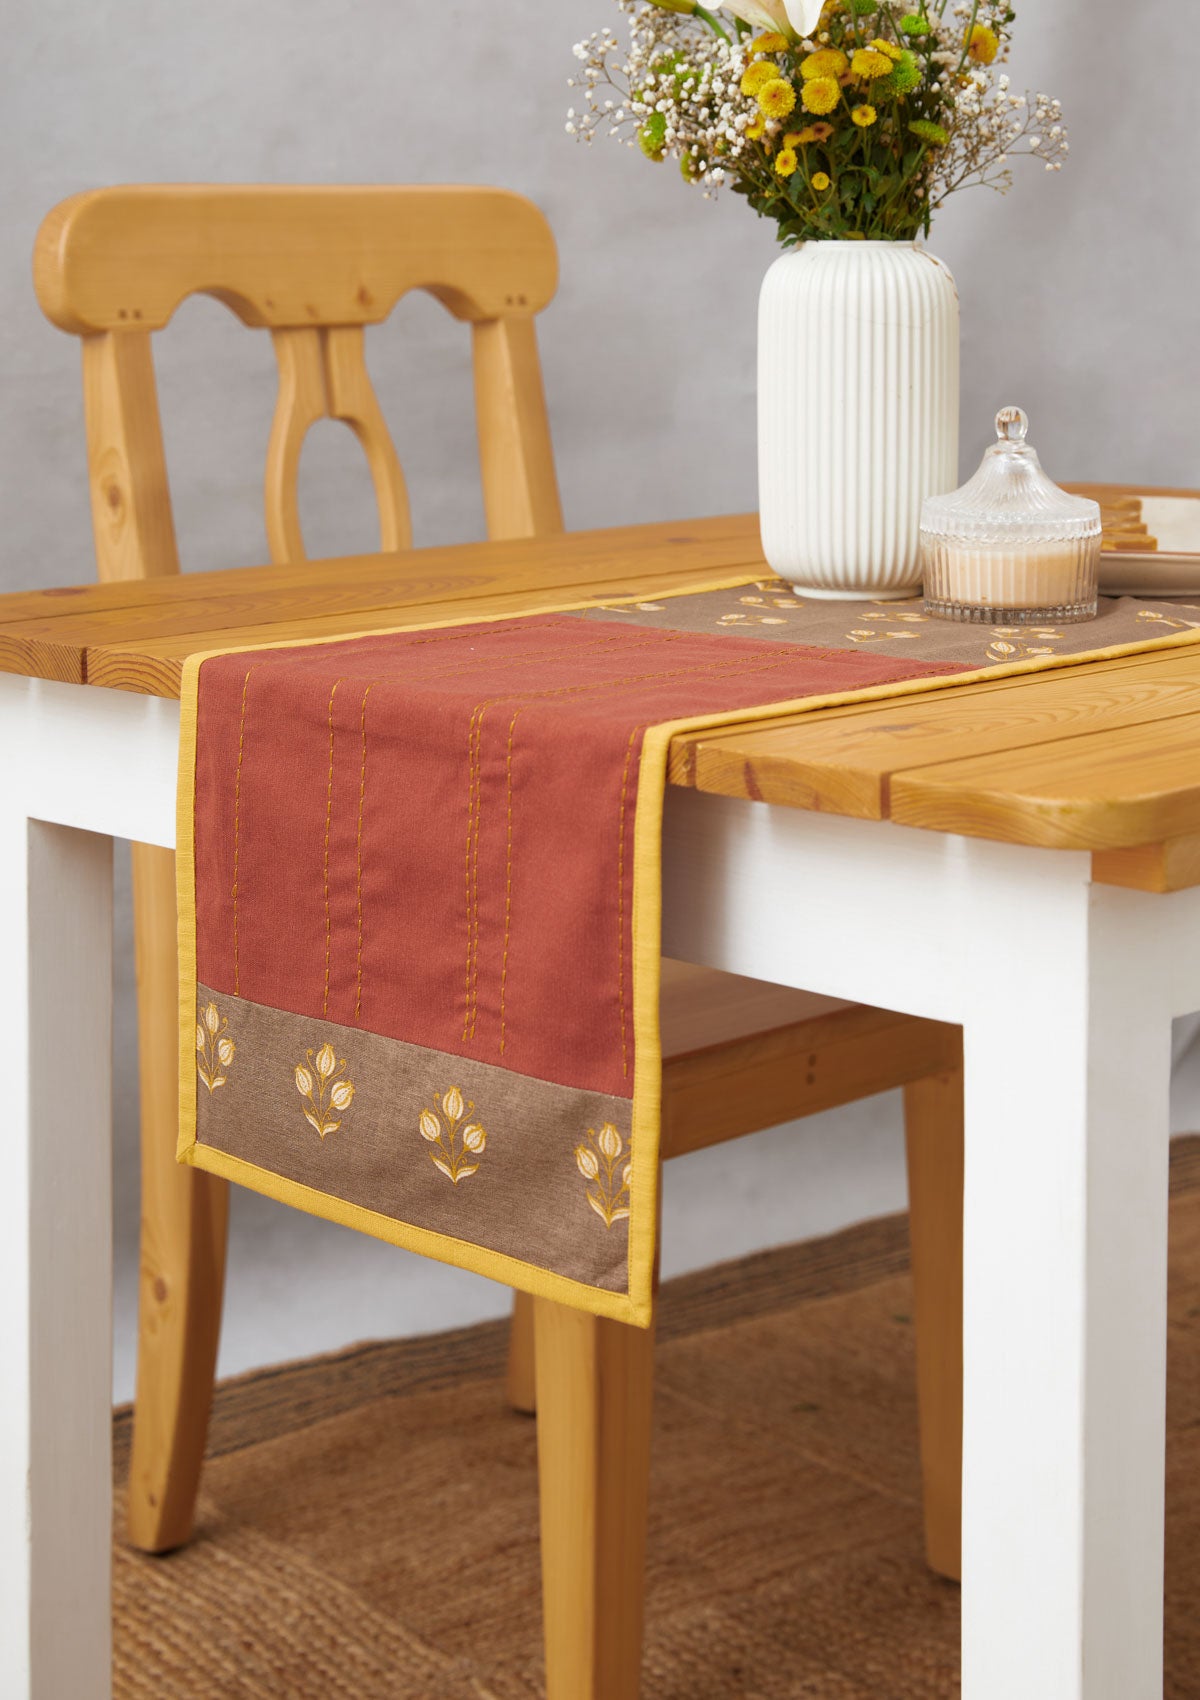 Great Rann 100% cotton elegant table runner for 4 seater or 6 seater Dining with tassels - Brick red